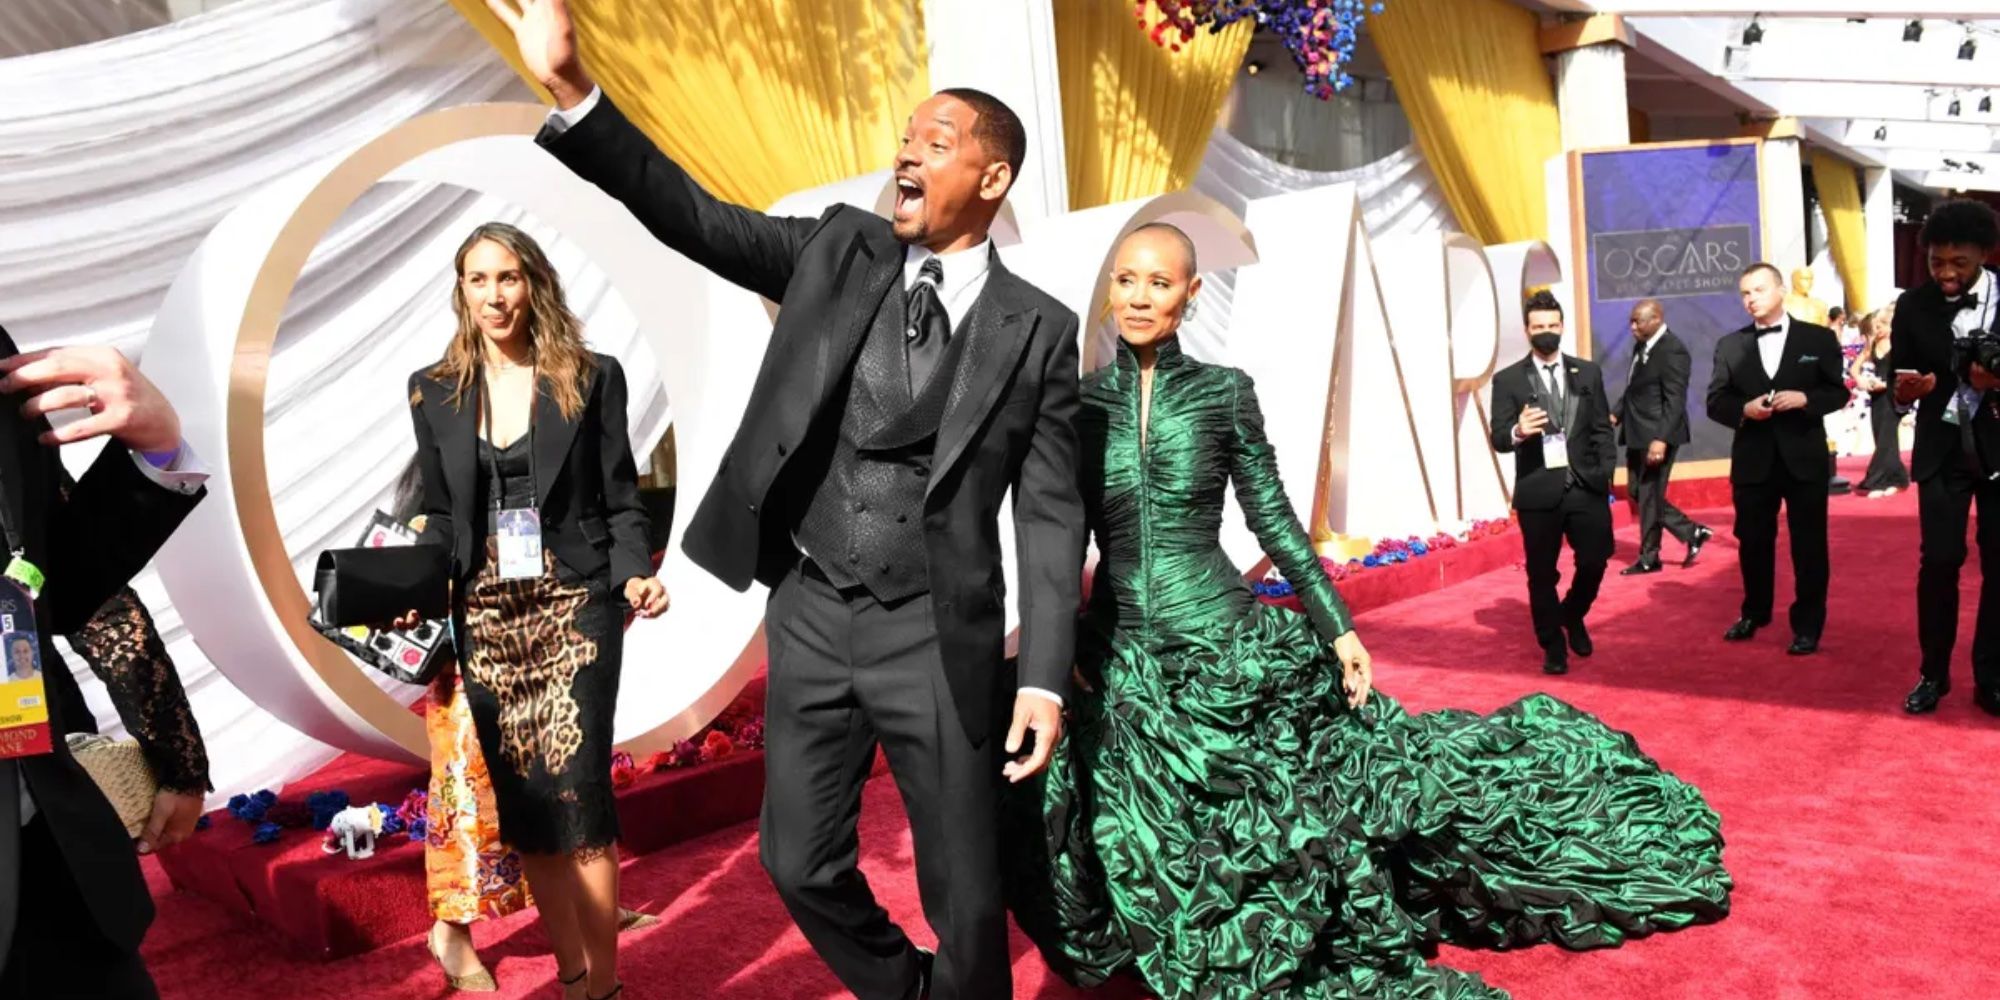 Oscars Red Carpet History—How an Awards Show Tradition Began